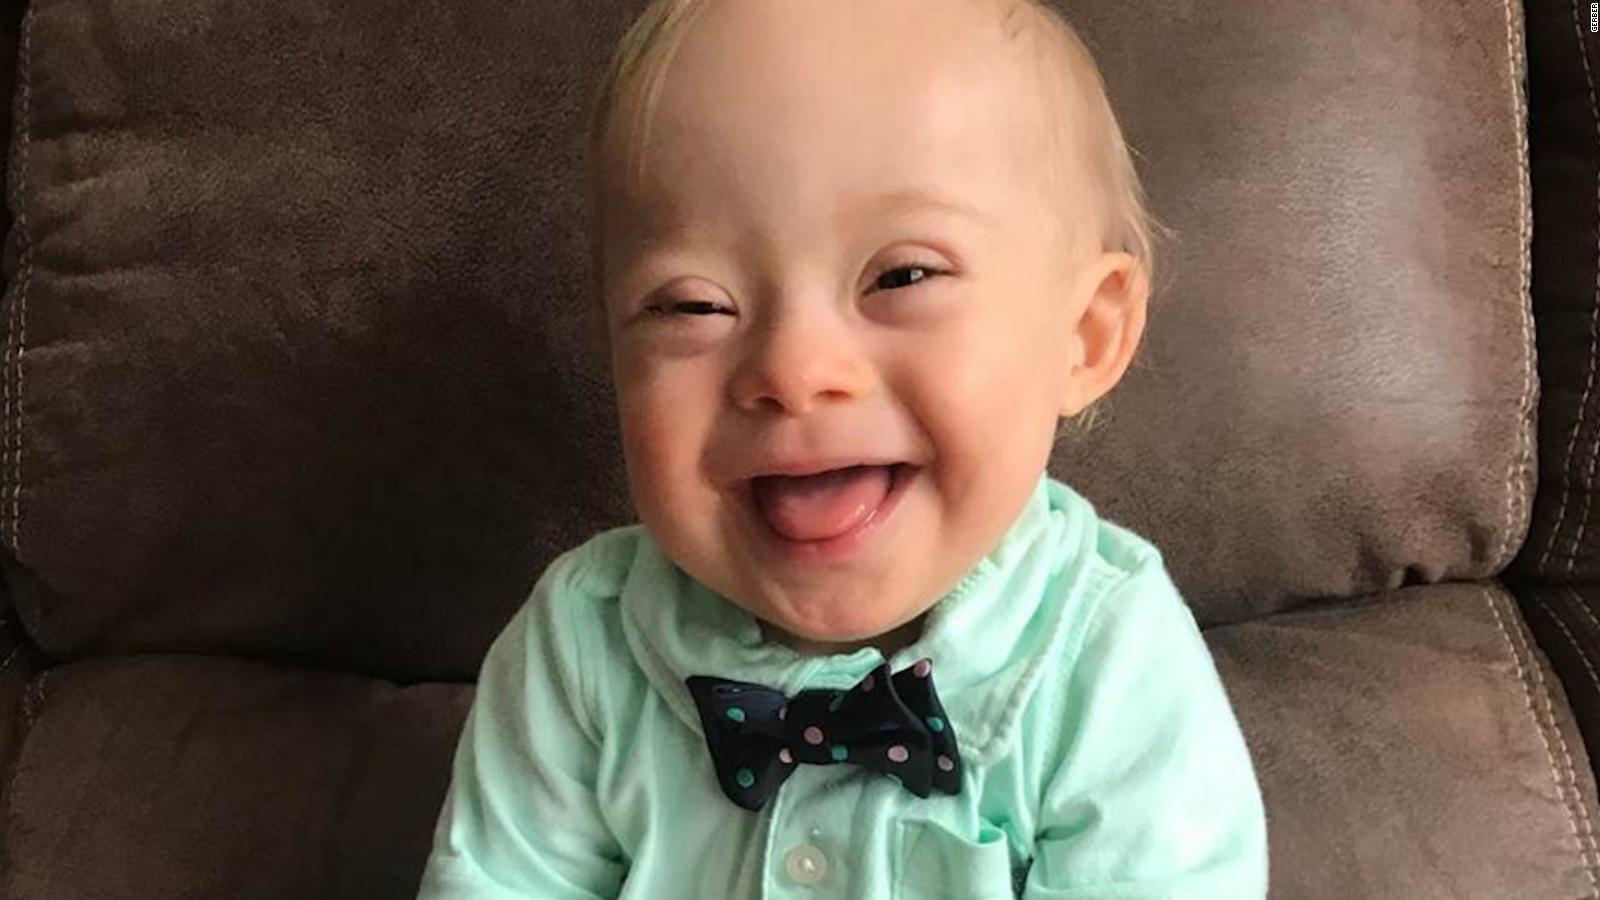 new gerber baby down syndrome